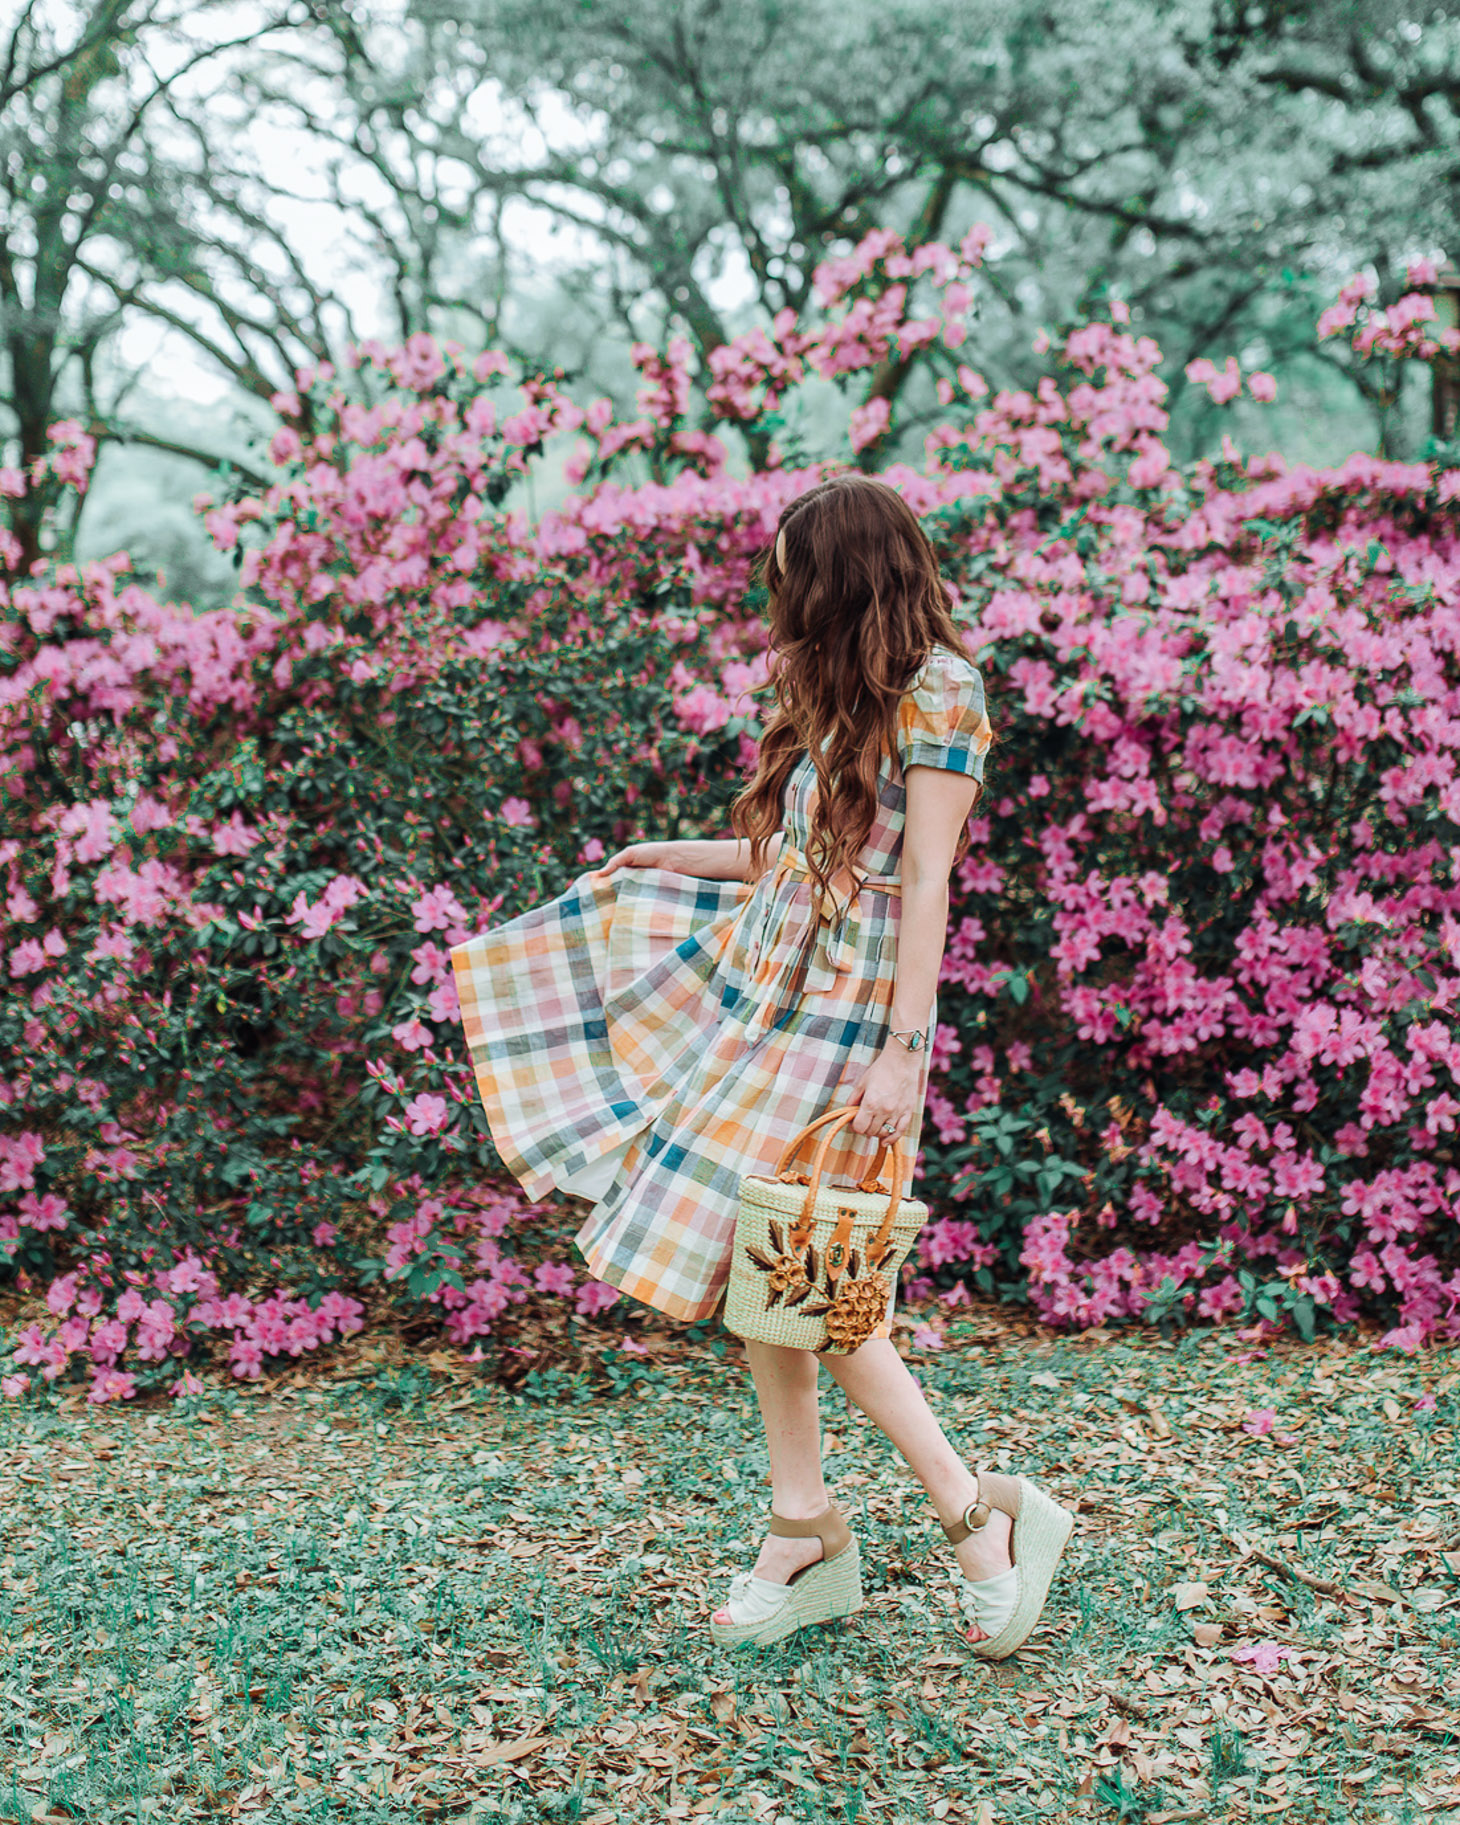 gingham gal – a lonestar state of southern